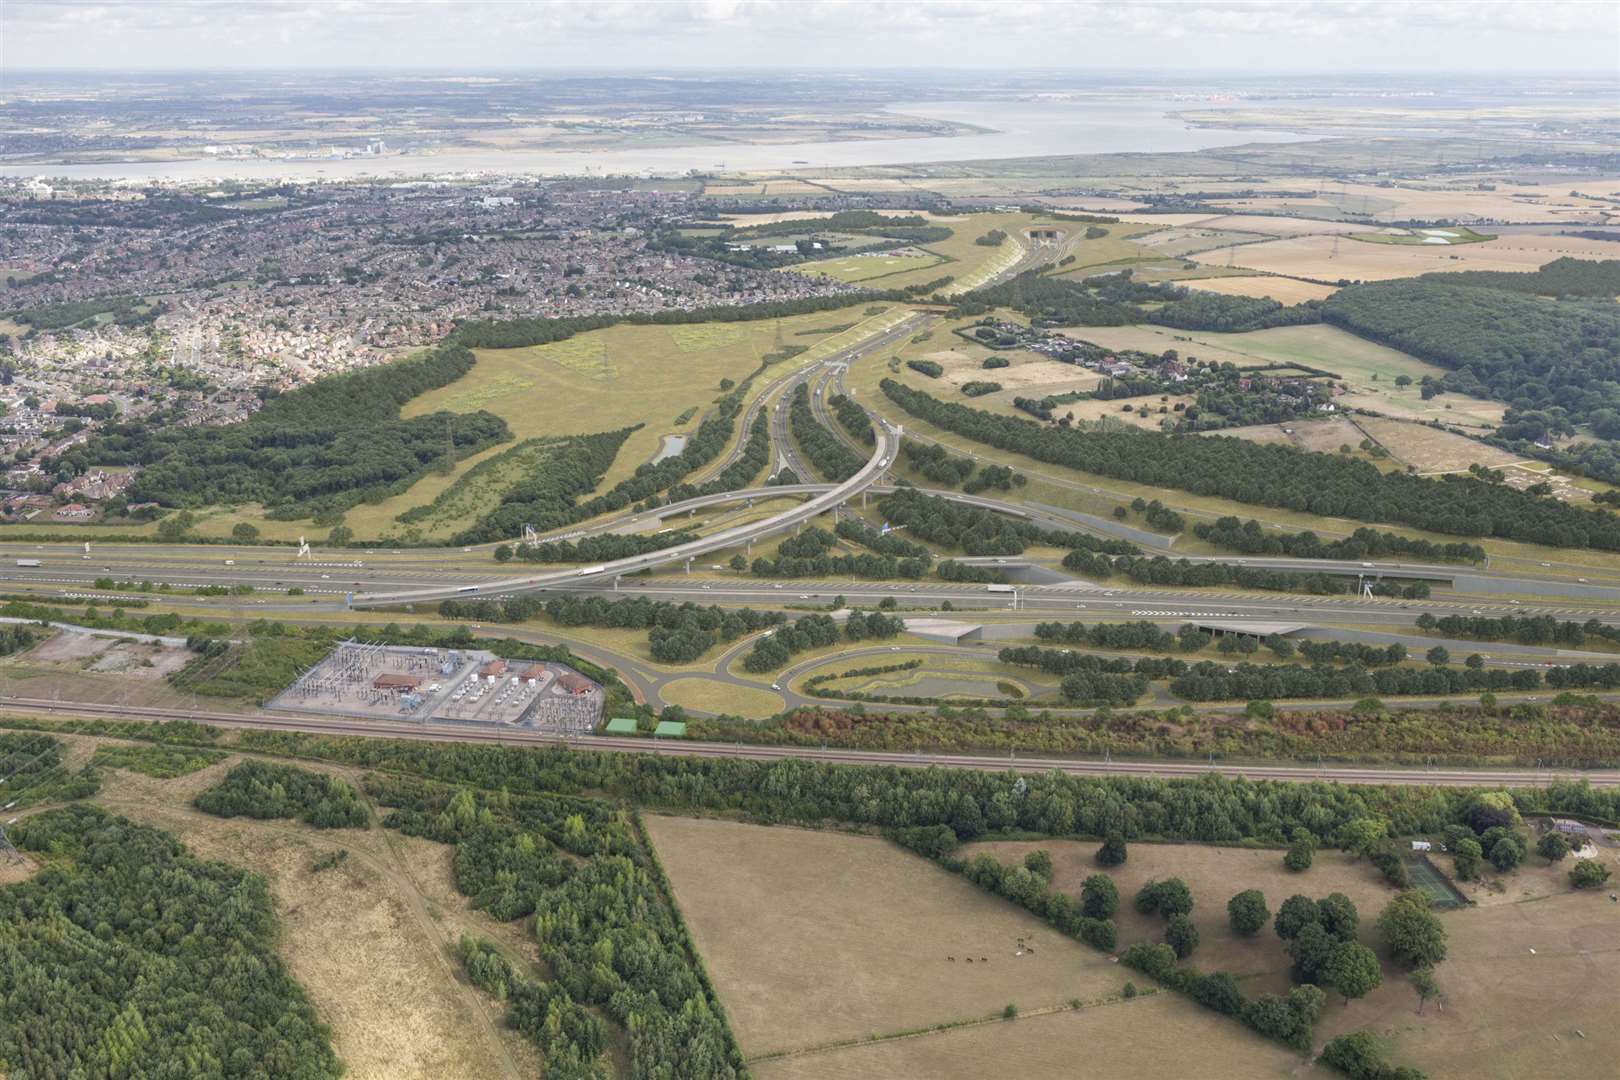 The proposed view looking north from the A2 to the Lower Thames Crossing. Image from National Highways